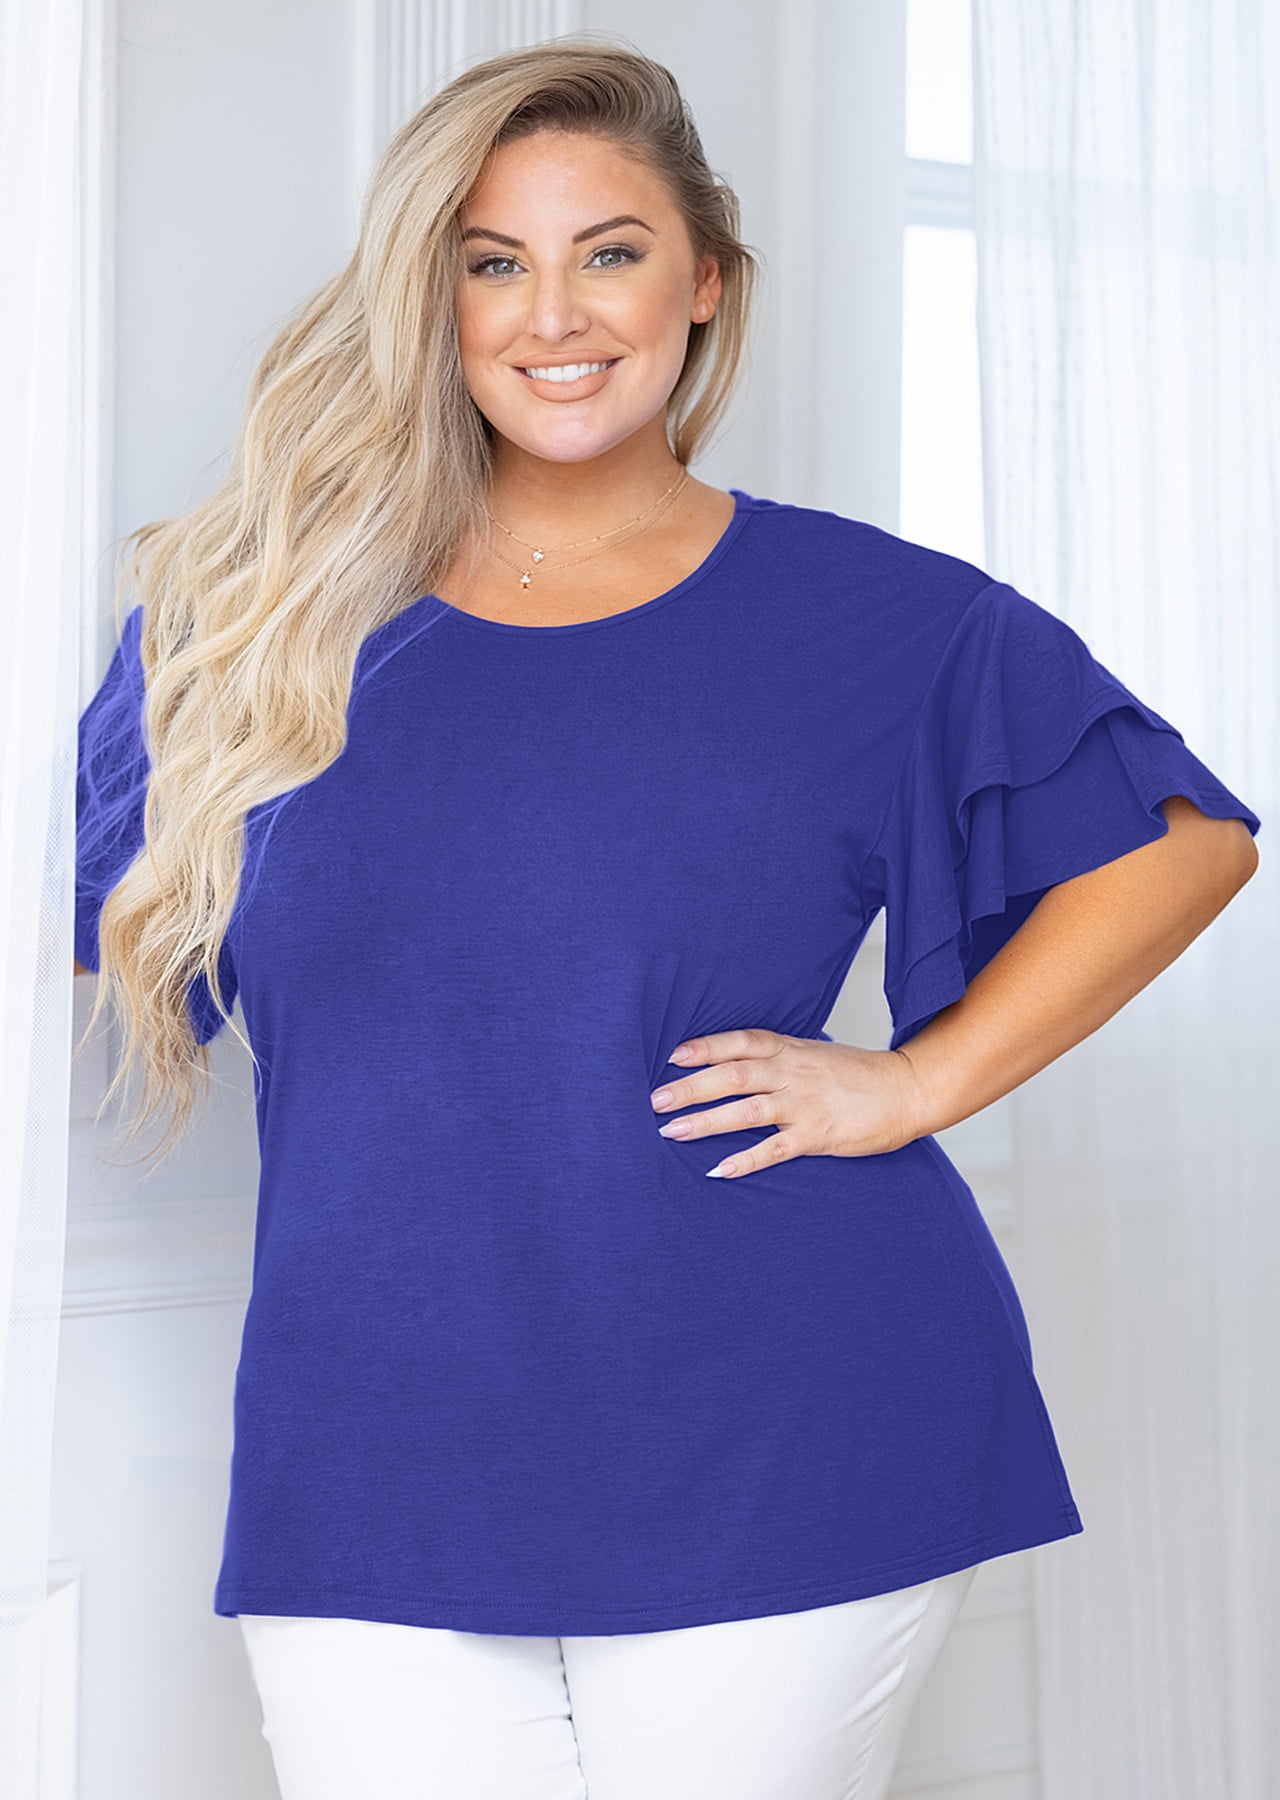 SHOWMALL Plus Size Clothes for Women Short Sleeve Blue 5X Tunic Shirt  Summer Tops Blouse Loose Fitting Clothing 